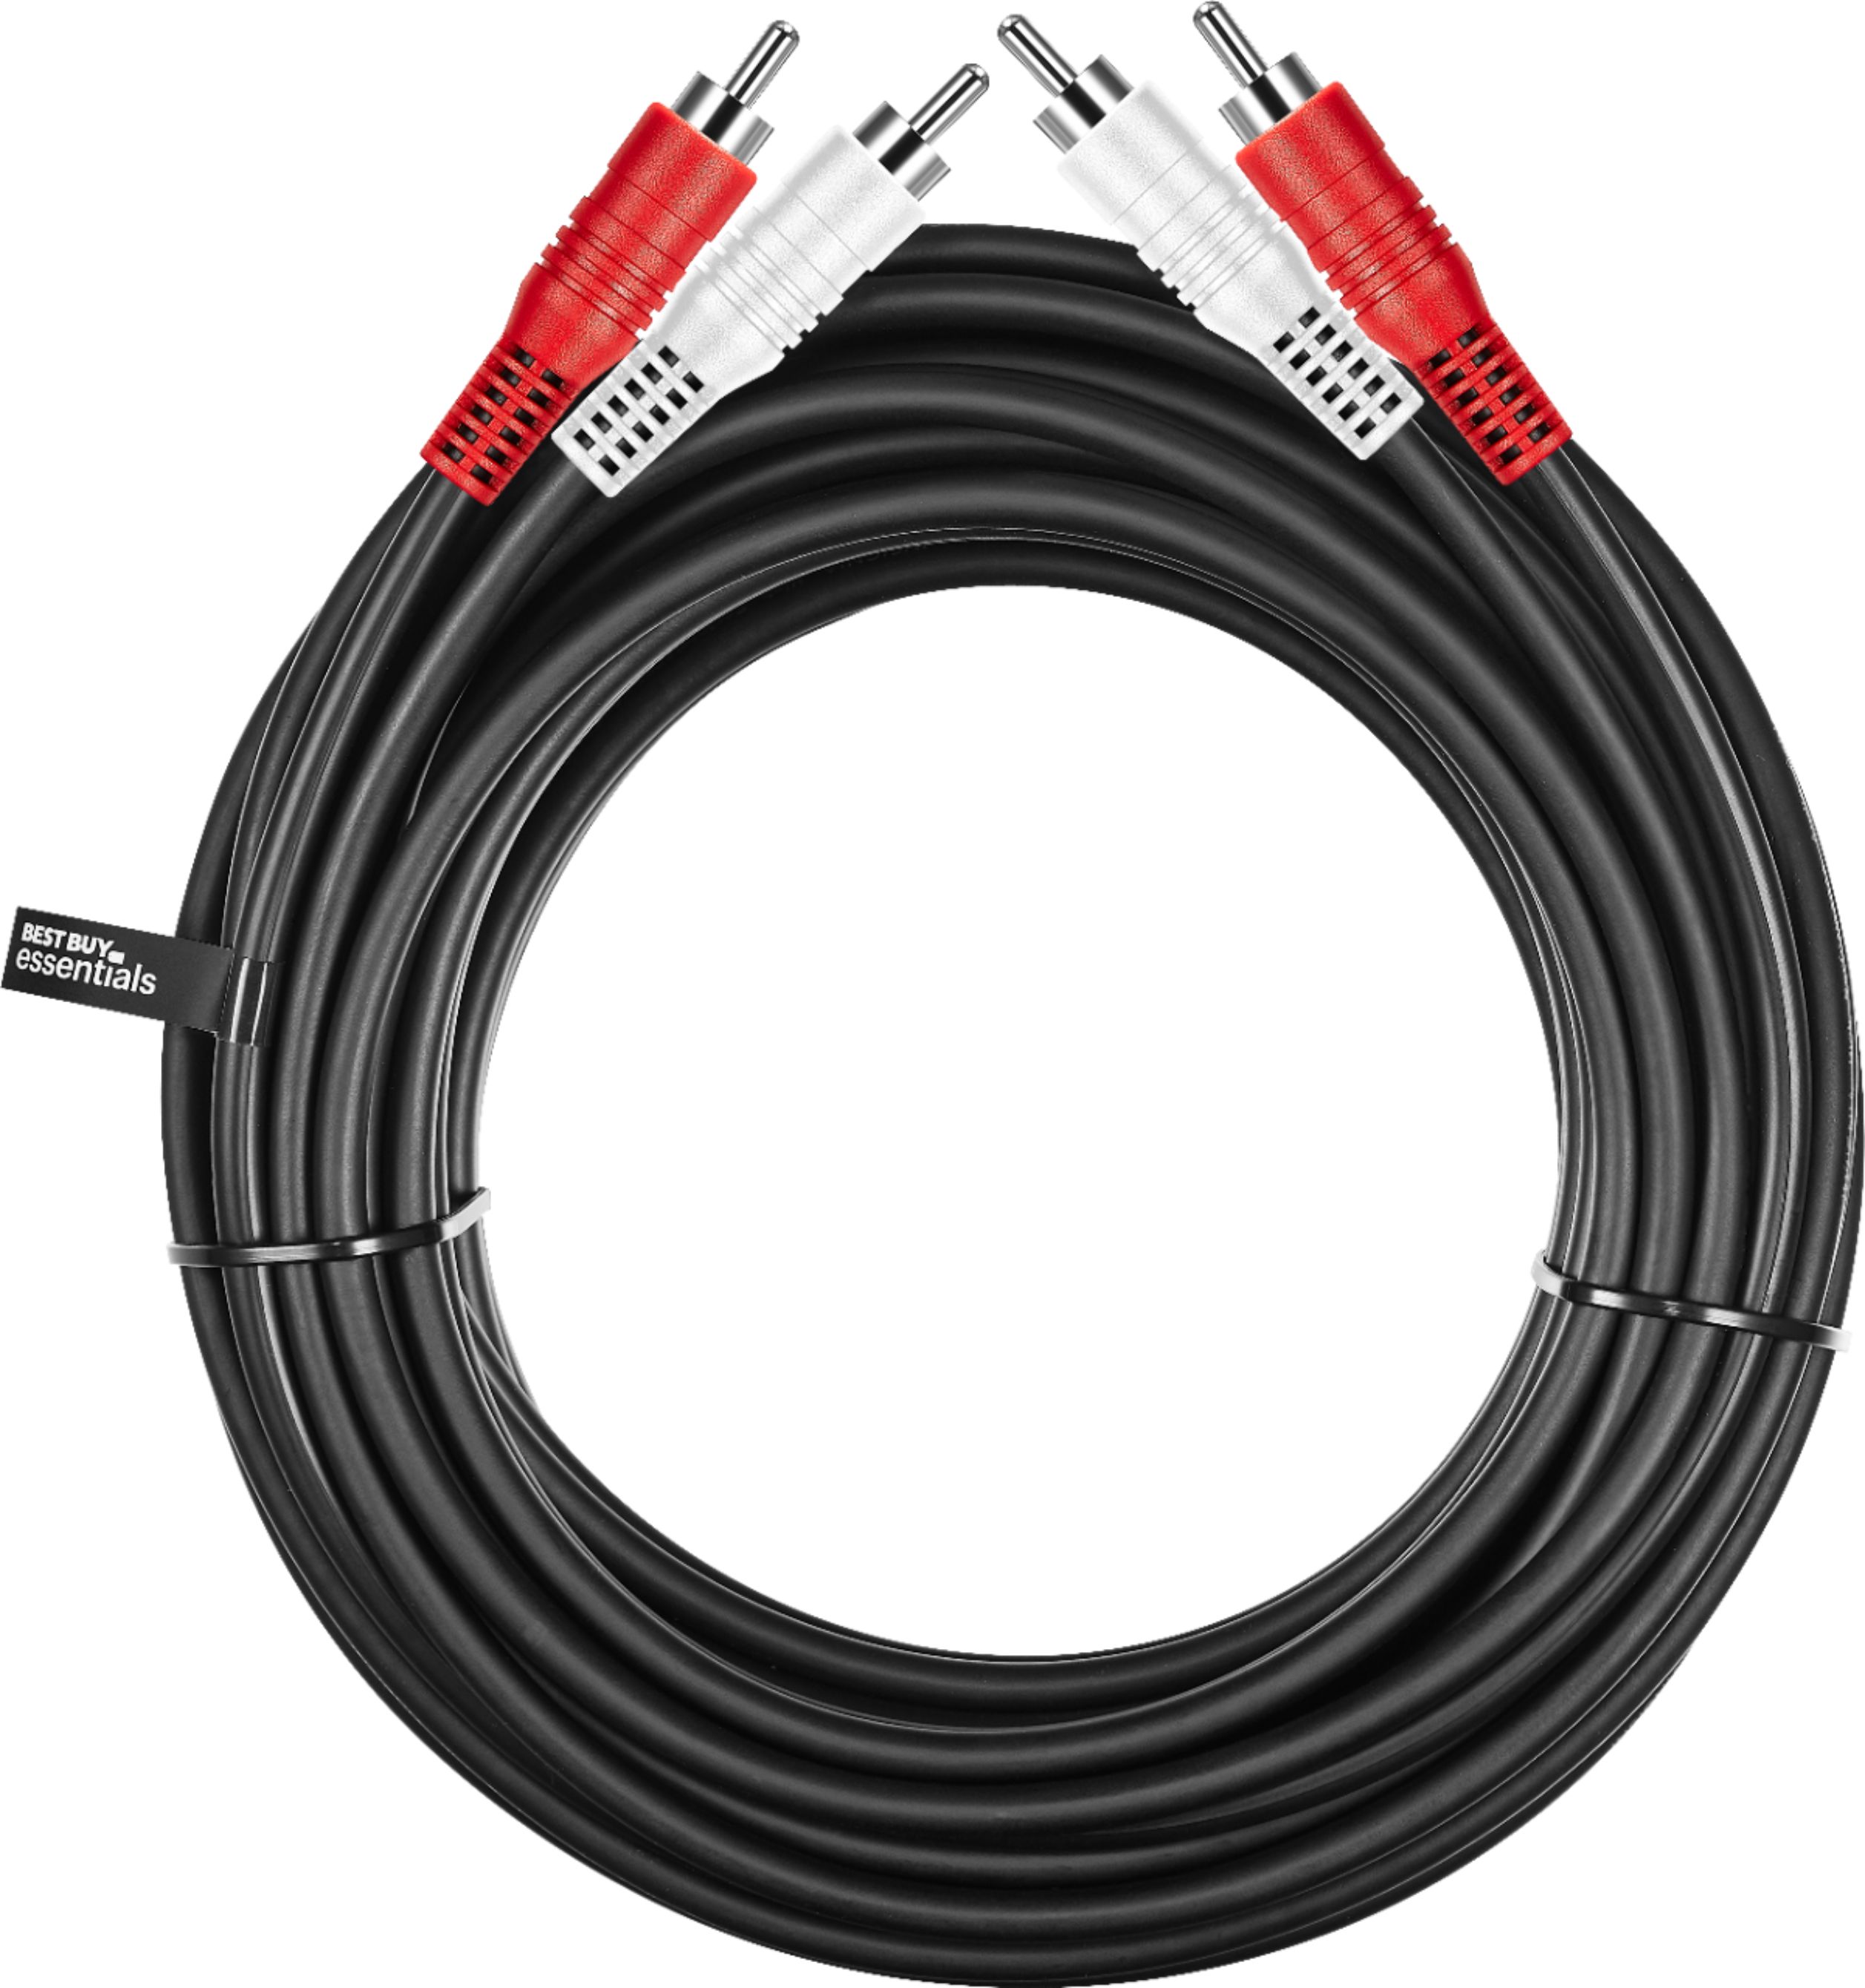 Best Buy essentials™ 25' Stereo Audio RCA Cable Black BE-HCL324 - Best Buy